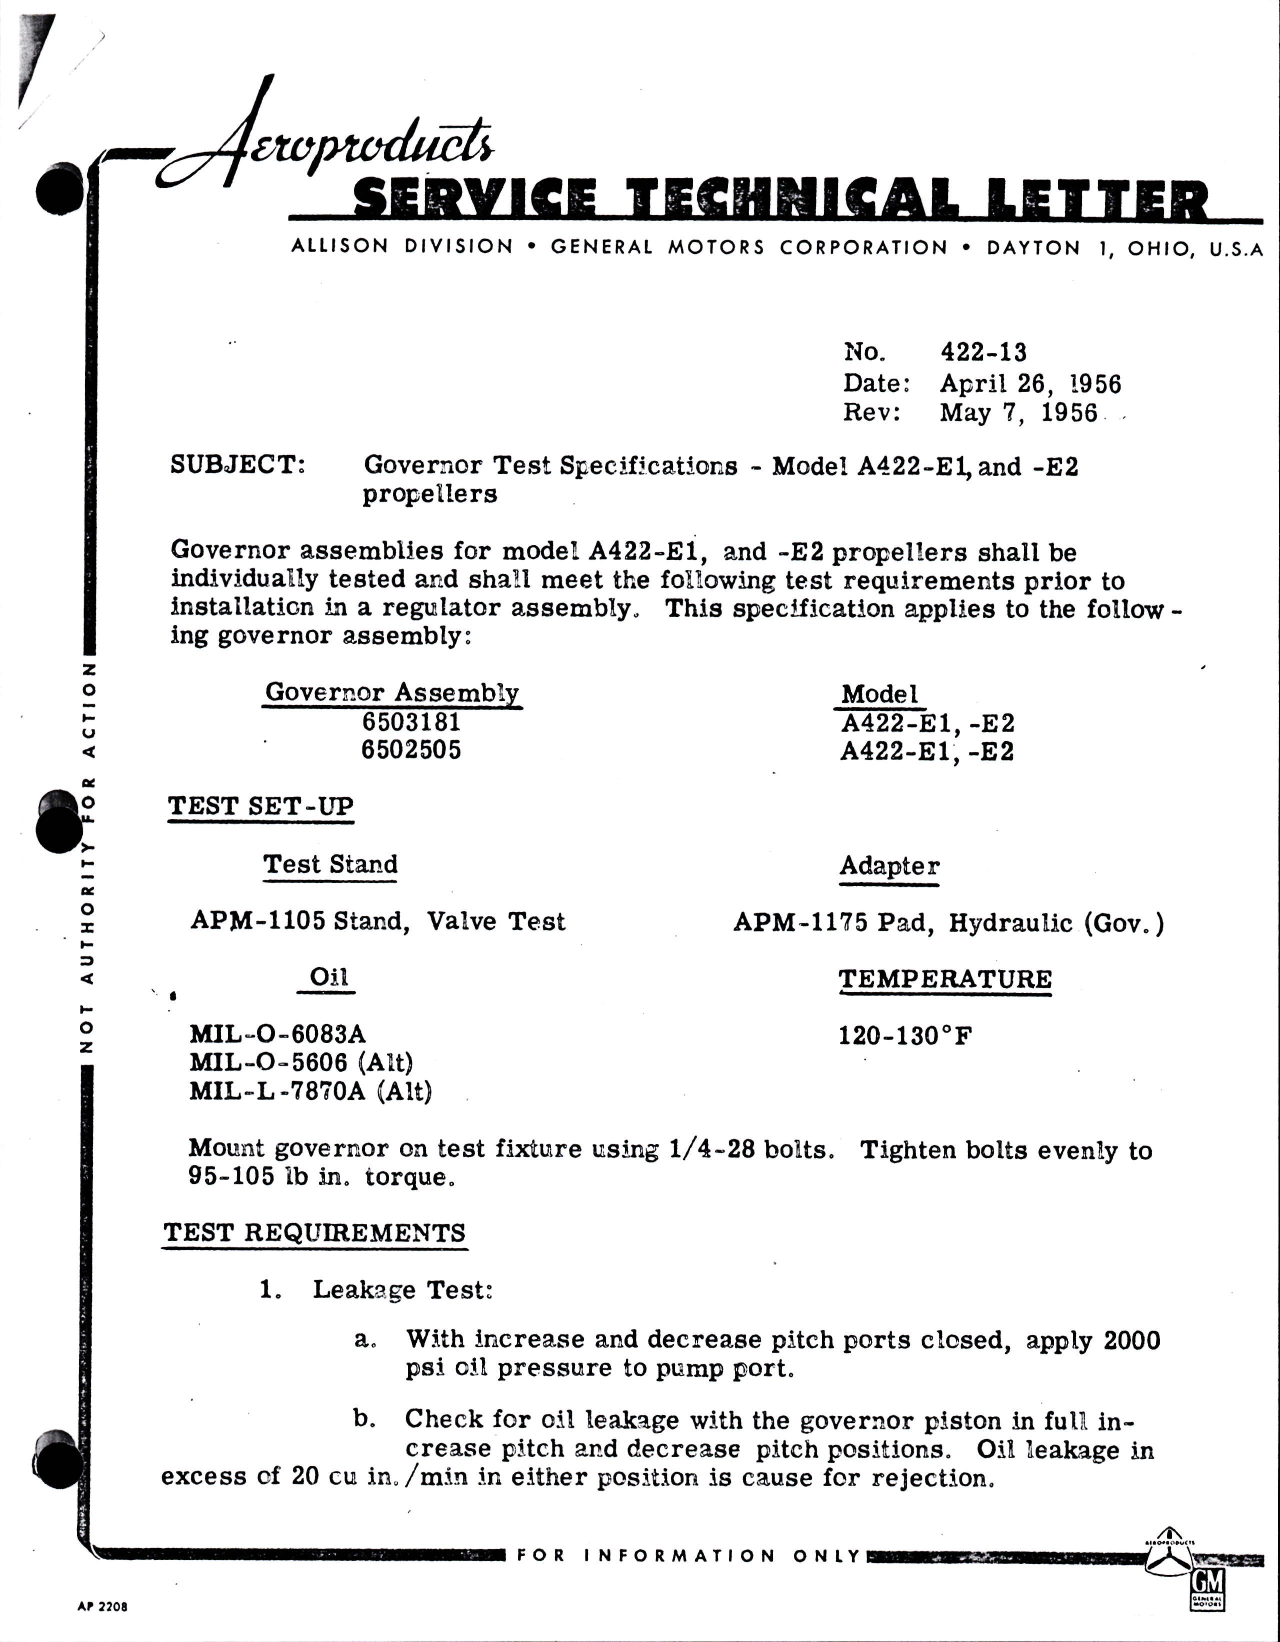 Sample page 1 from AirCorps Library document: Governor Test Specifications for Model A422-E1 and -E2 Propellers